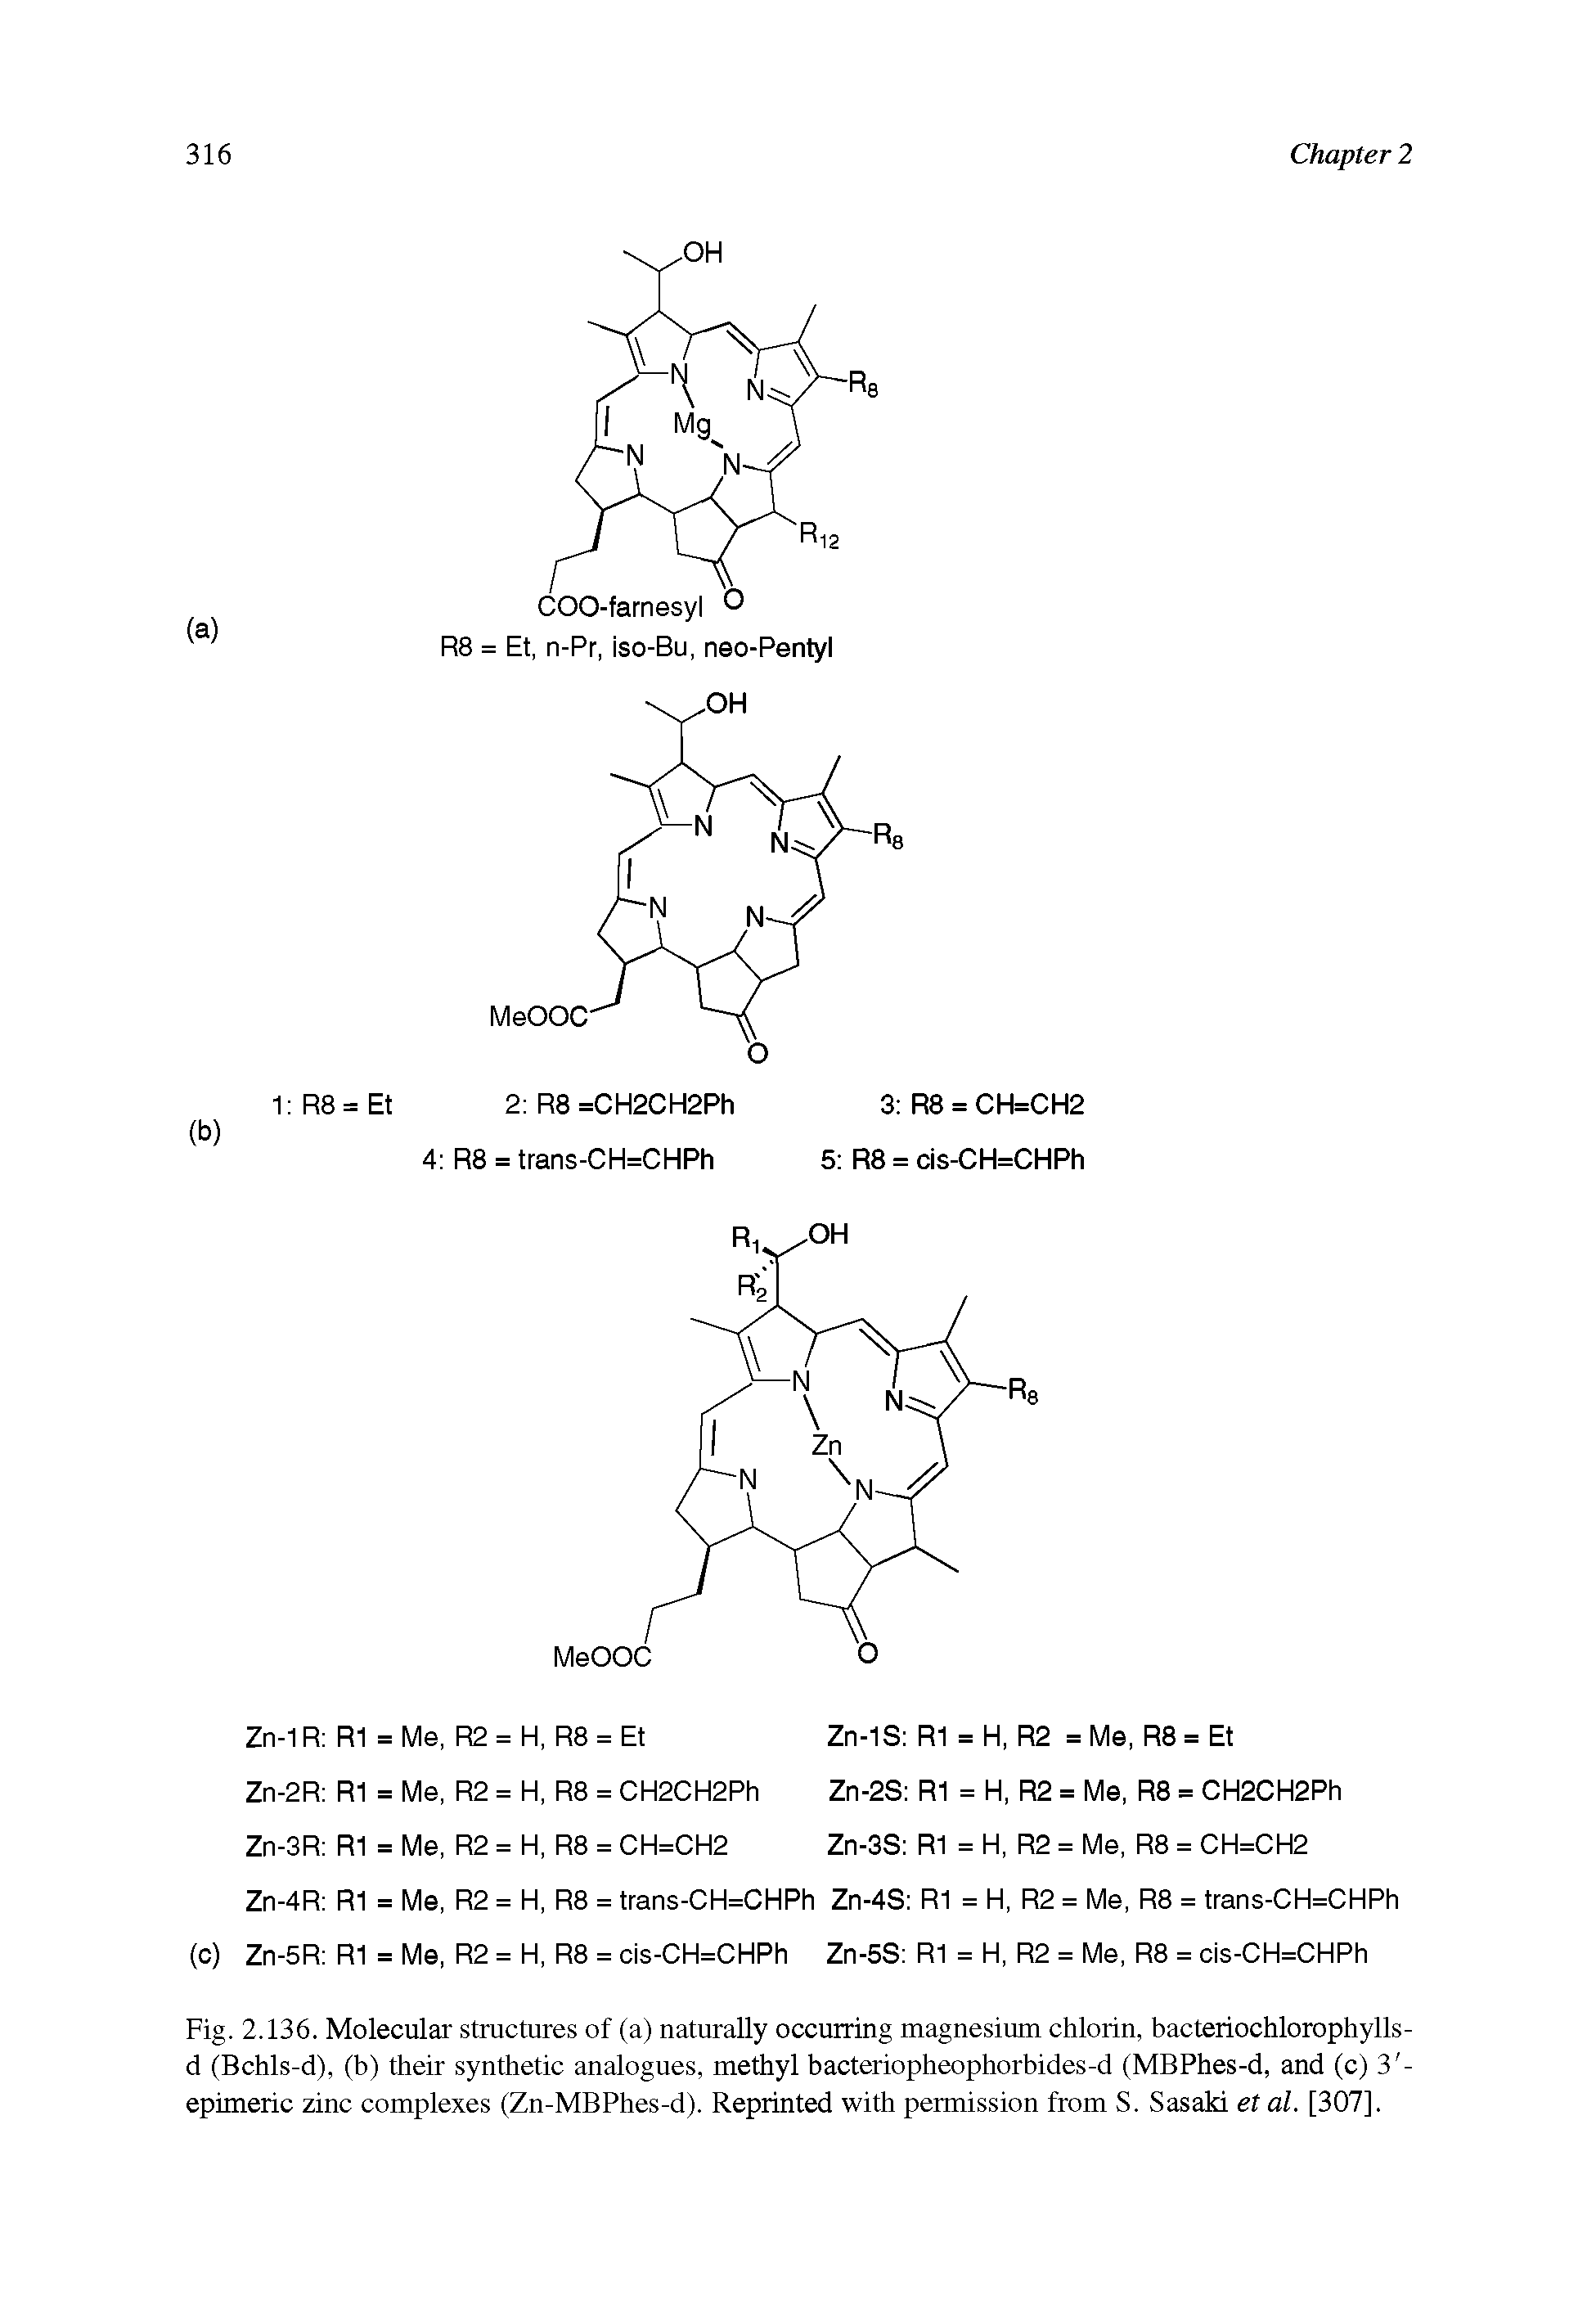 Fig. 2.136. Molecular structures of (a) naturally occurring magnesium chlorin, bacteriochlorophylls-d (Bchls-d), (b) their synthetic analogues, methyl bacteriopheophorbides-d (MBPhes-d, and (c) 3 -epimeric zinc complexes (Zn-MBPhes-d). Reprinted with permission from S. Sasaki et al. [307],...